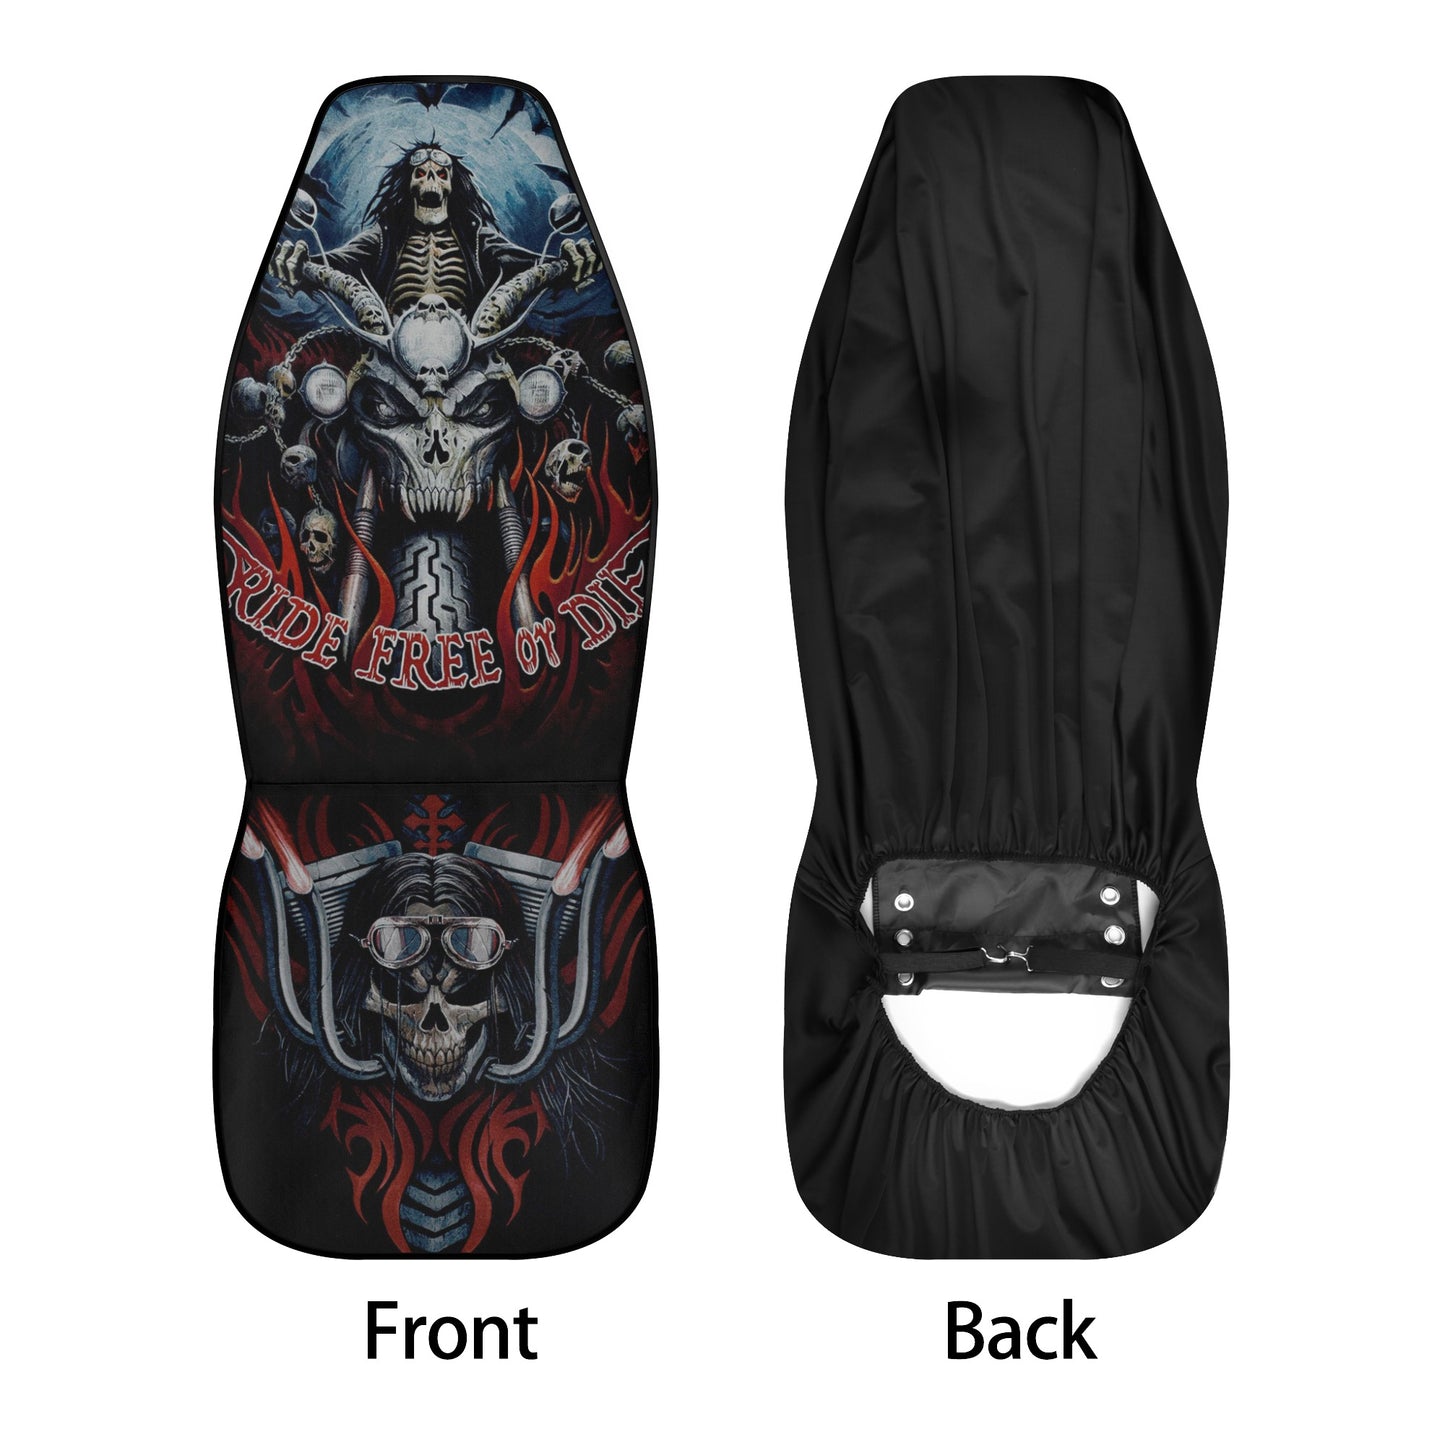 Gothic skull floor mat for car, rose skull car accessories, evil truck seat cover, punisher skull washable car seat covers, goth slip-on sea